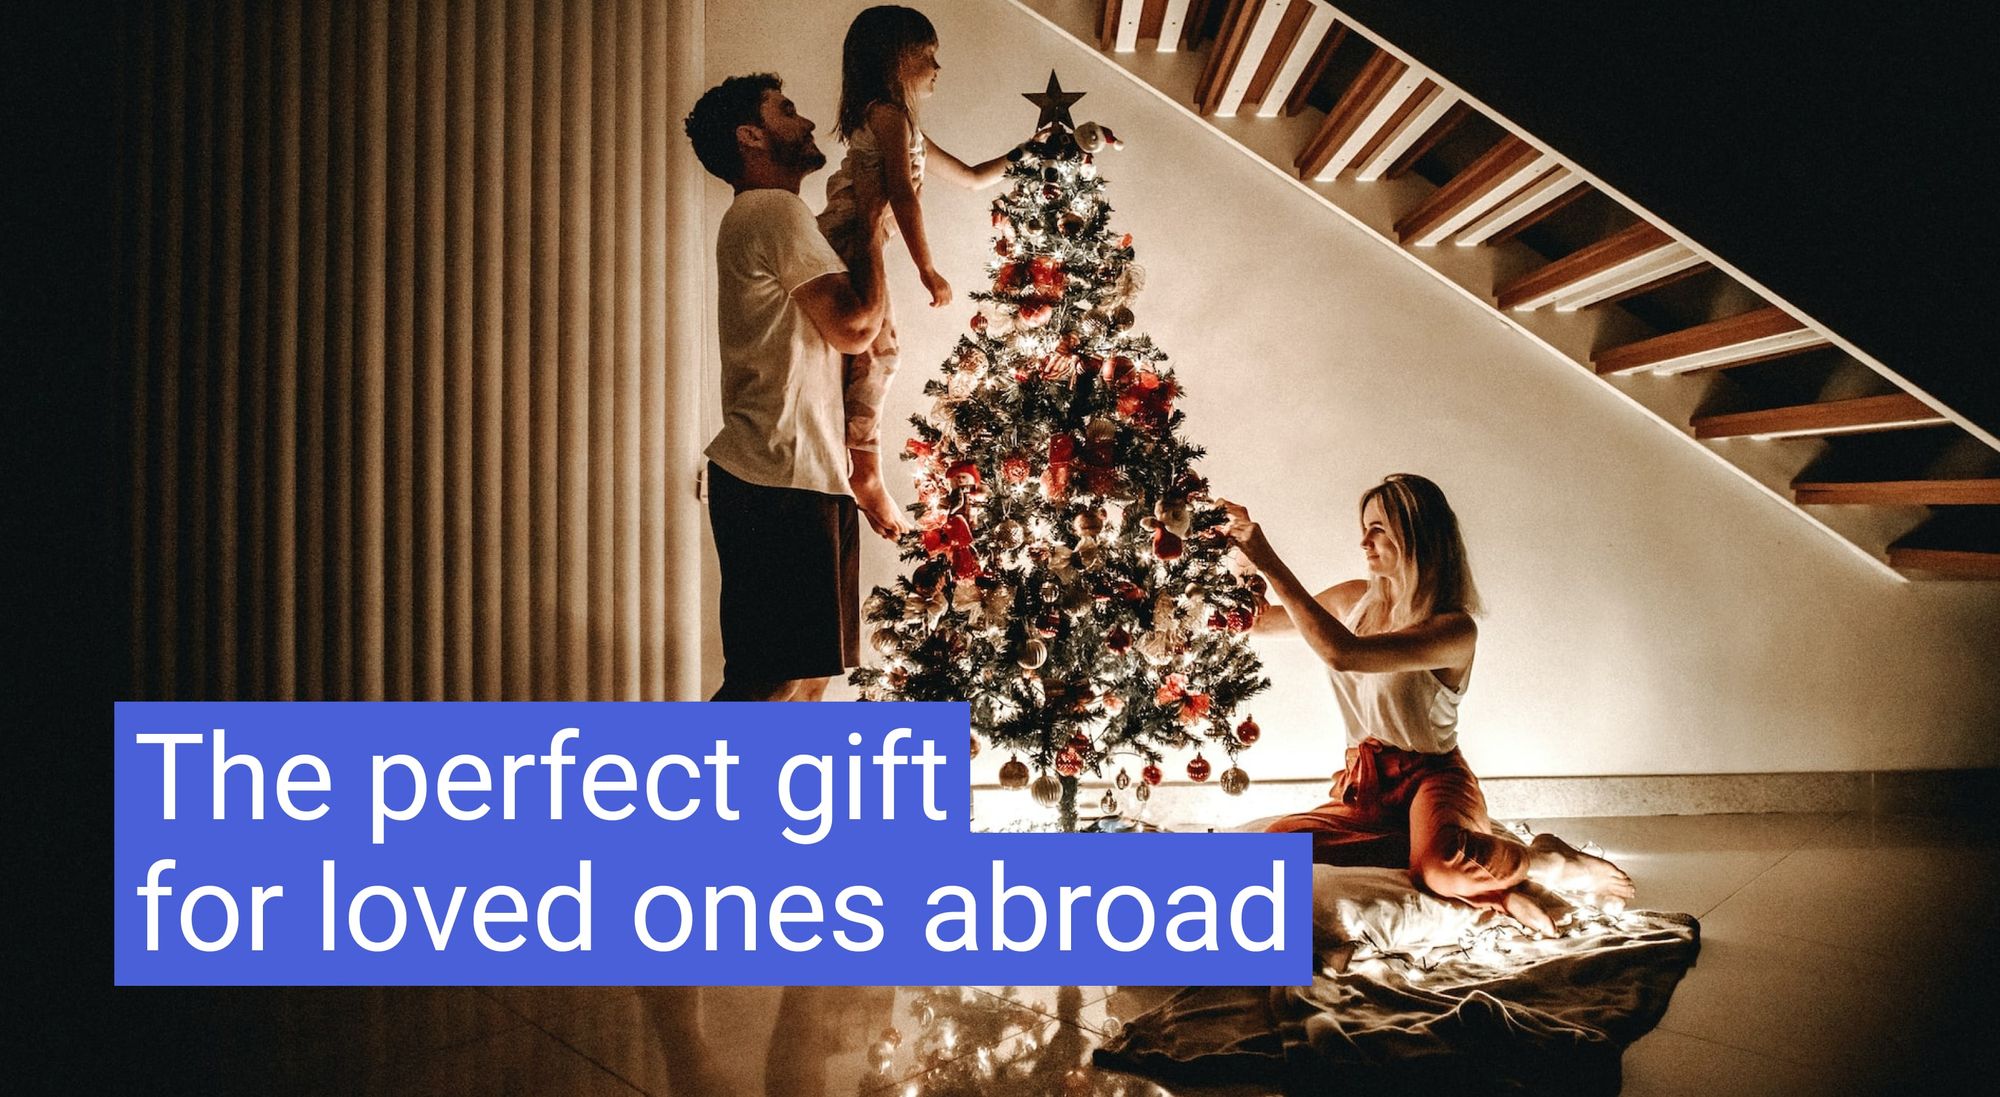 Why an International Money Transfer is a Great Christmas Gift